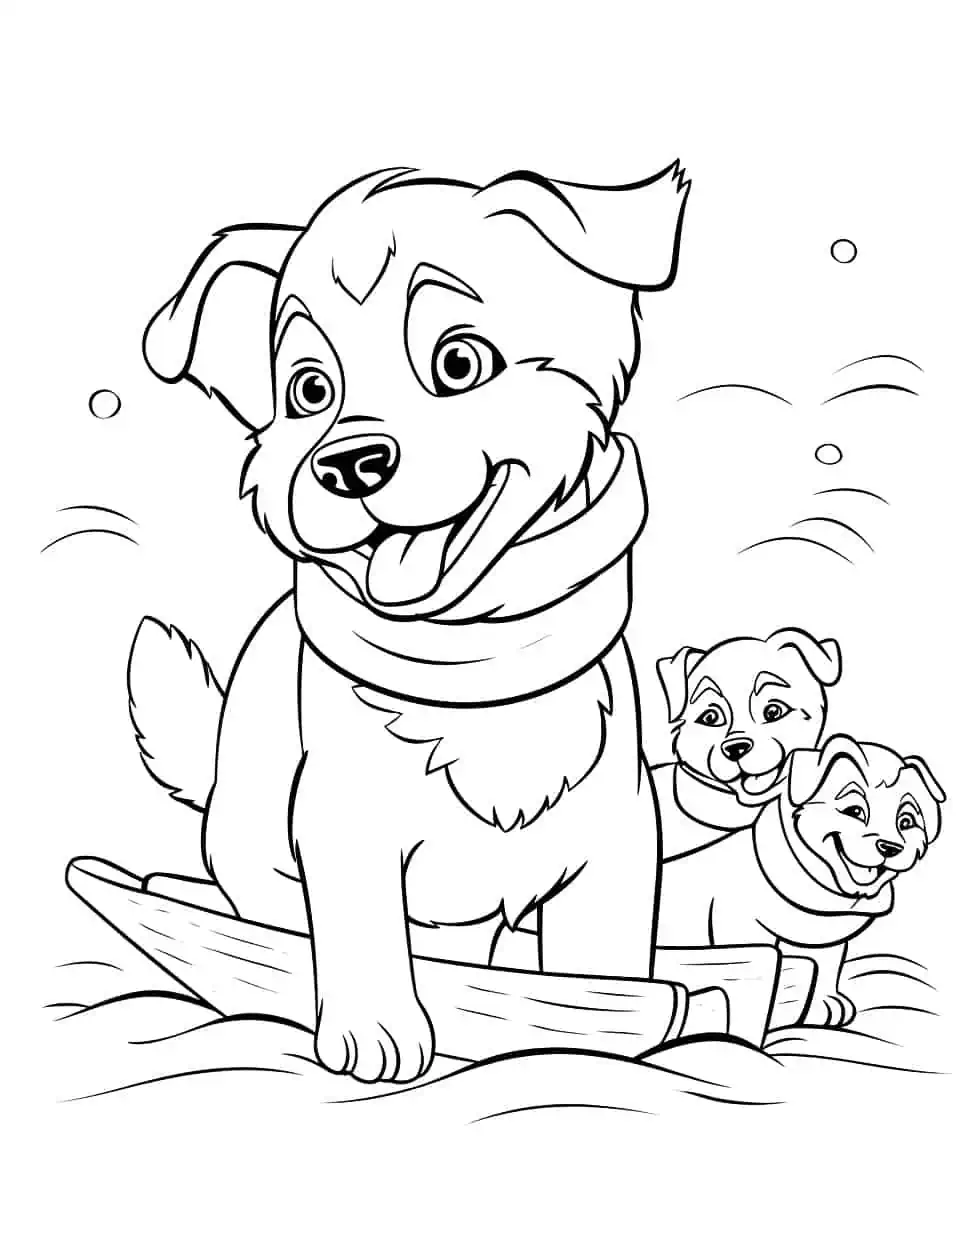 Sledding Husky Dog Coloring Page - A group of Huskies pulling a sled in a snowy landscape.